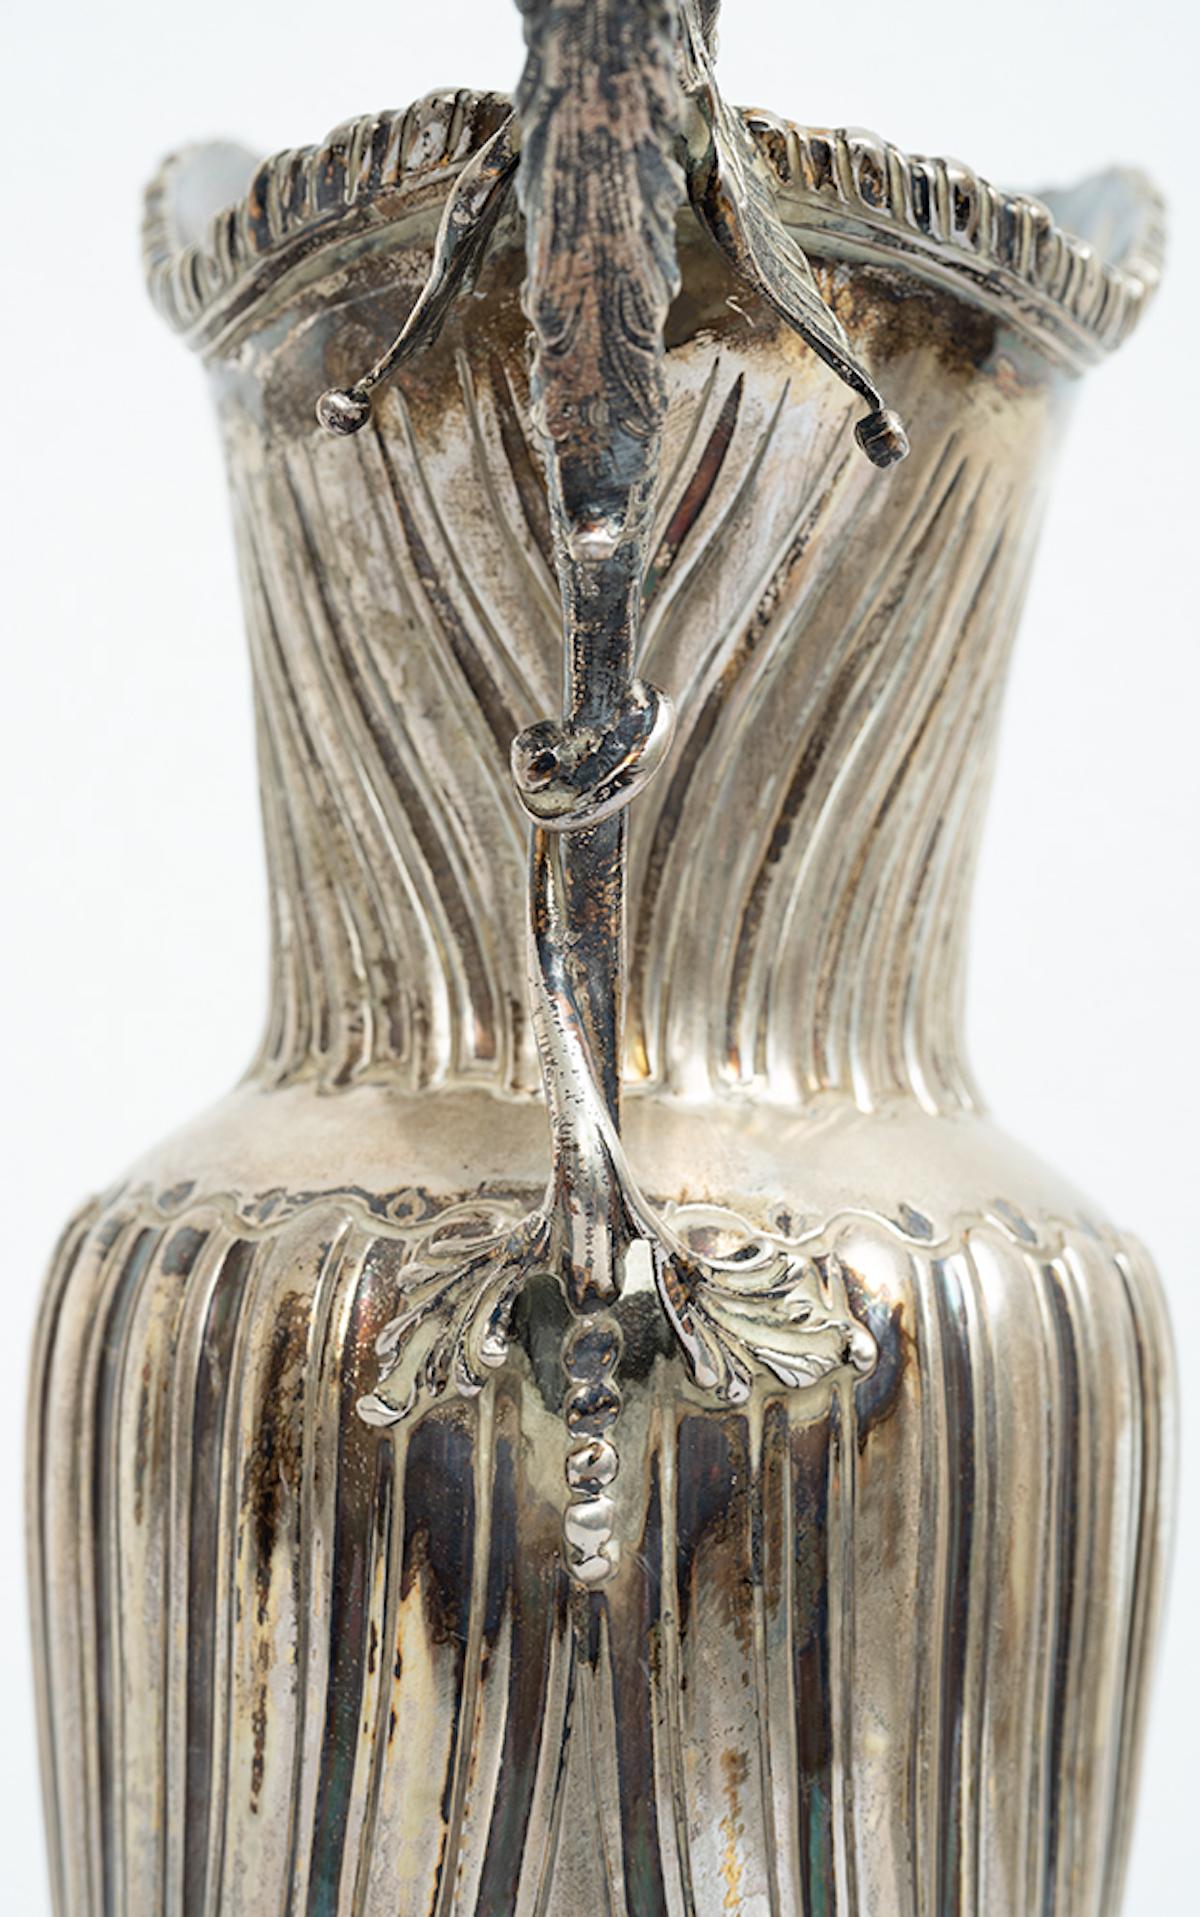 Antique Neapolitan silver pourer belonging to the early 20th century. - Silver Figurative Sculpture by Unknown